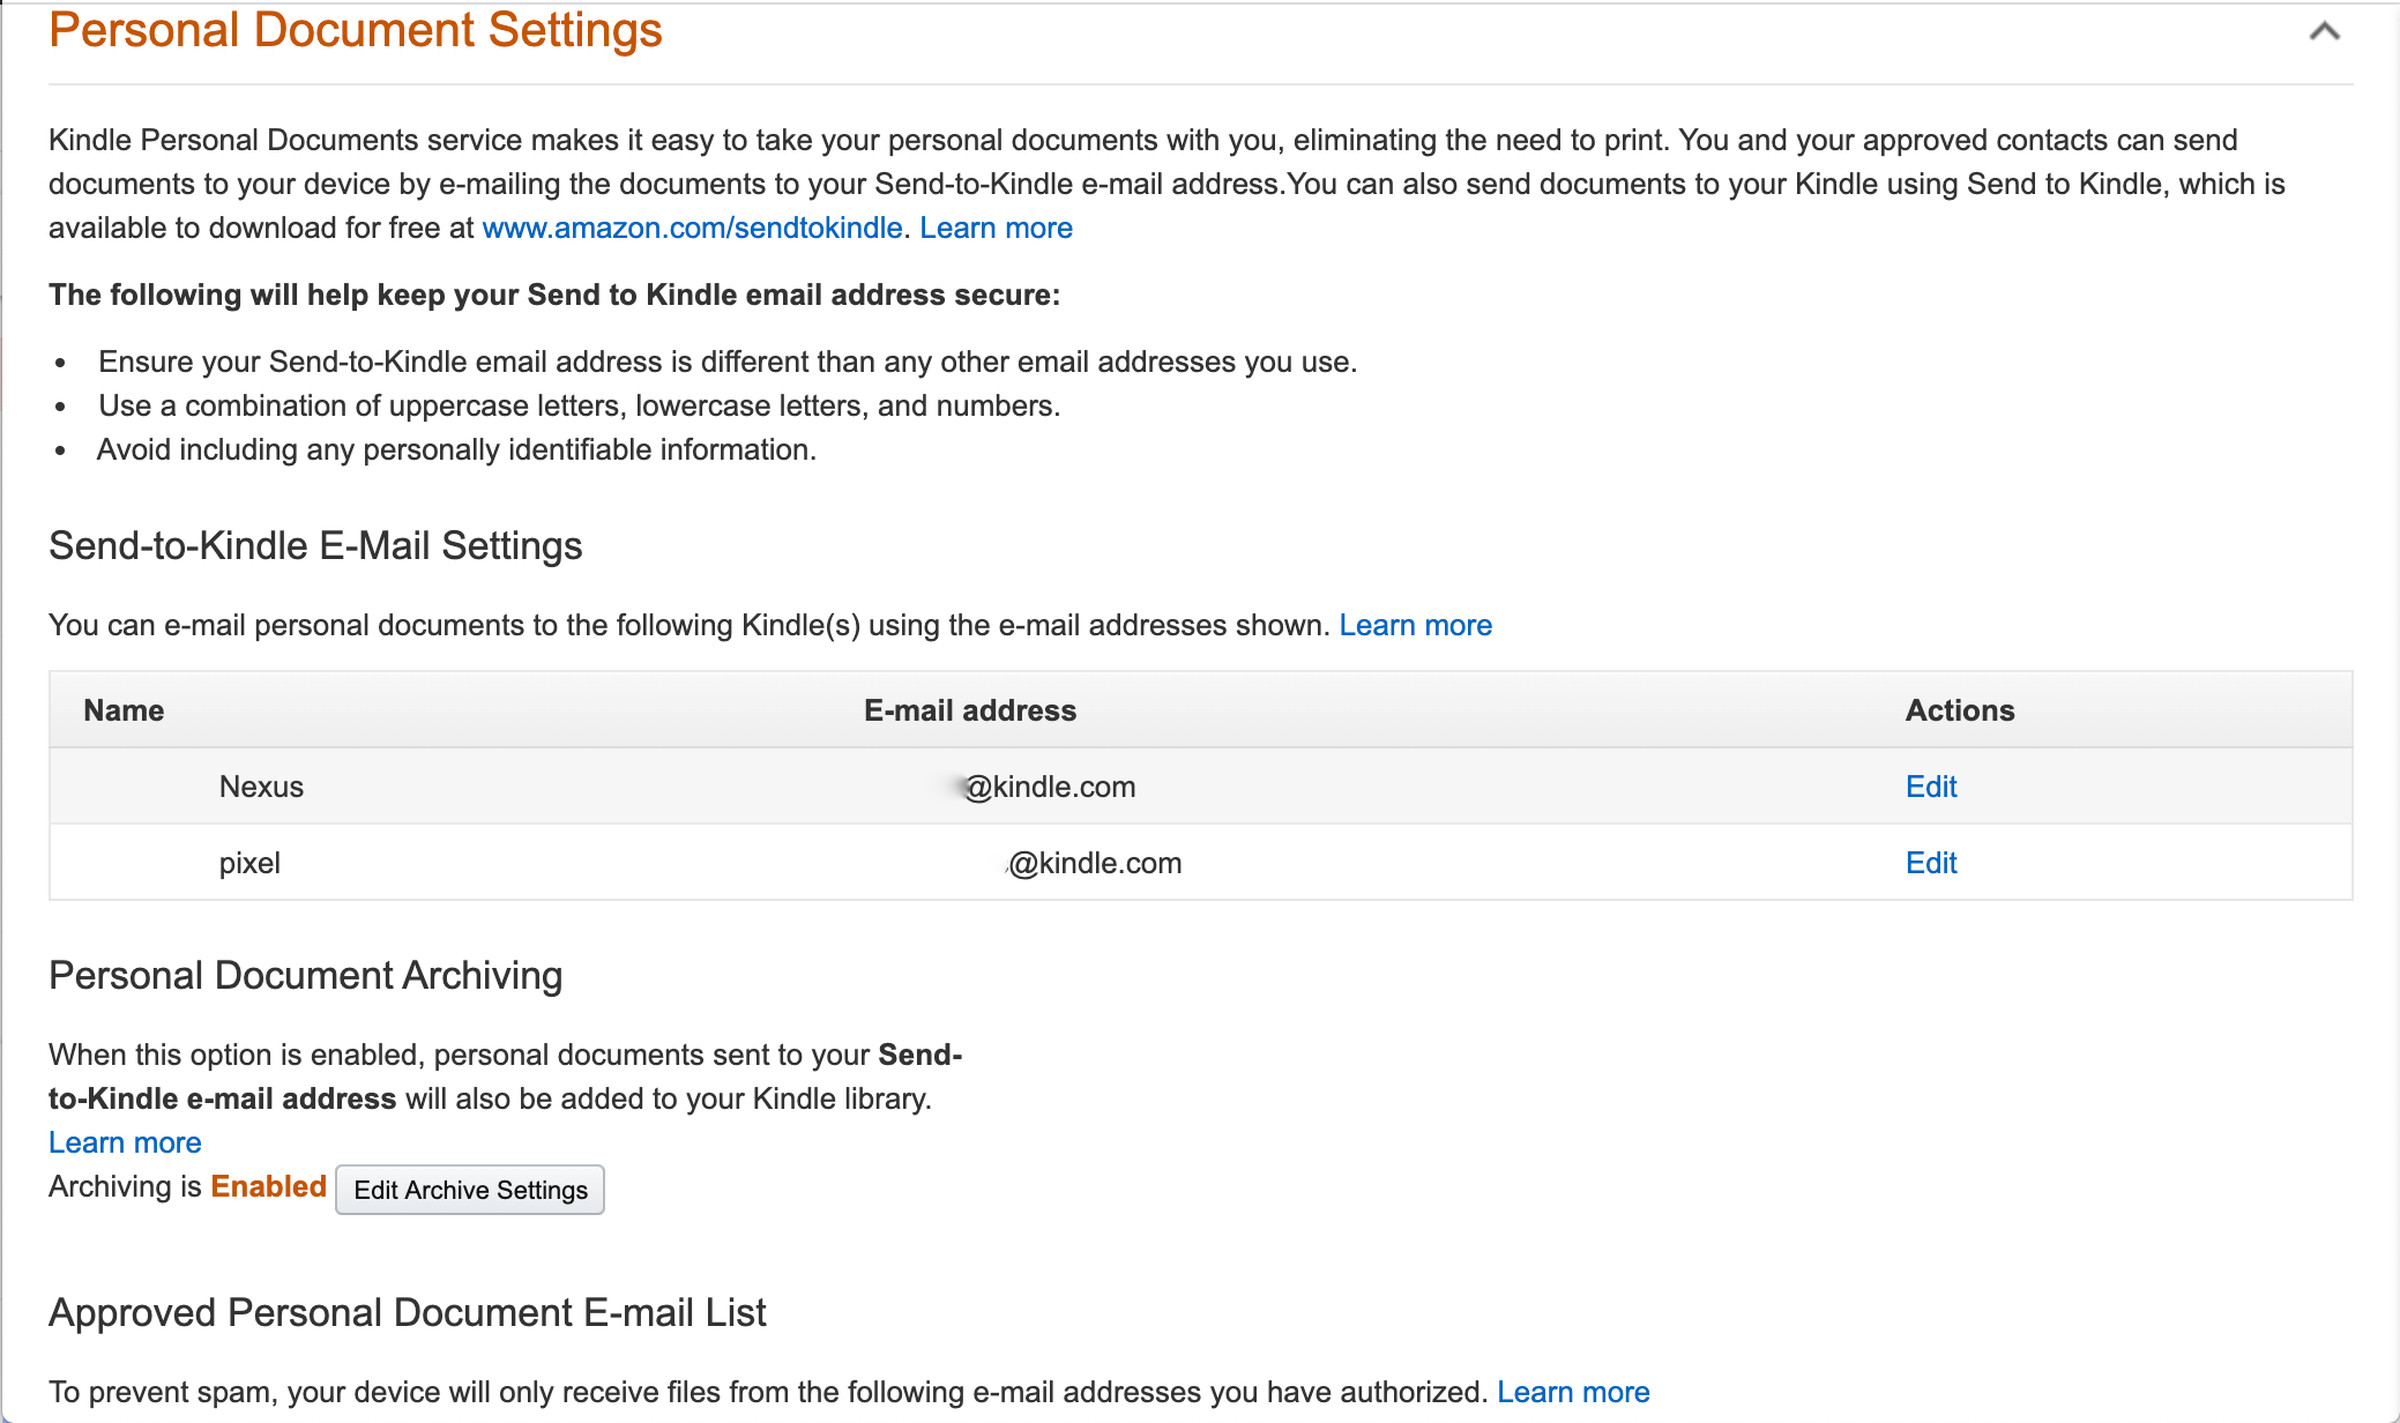 In Amazon’s settings, you can find your device’s unique Kindle email address.